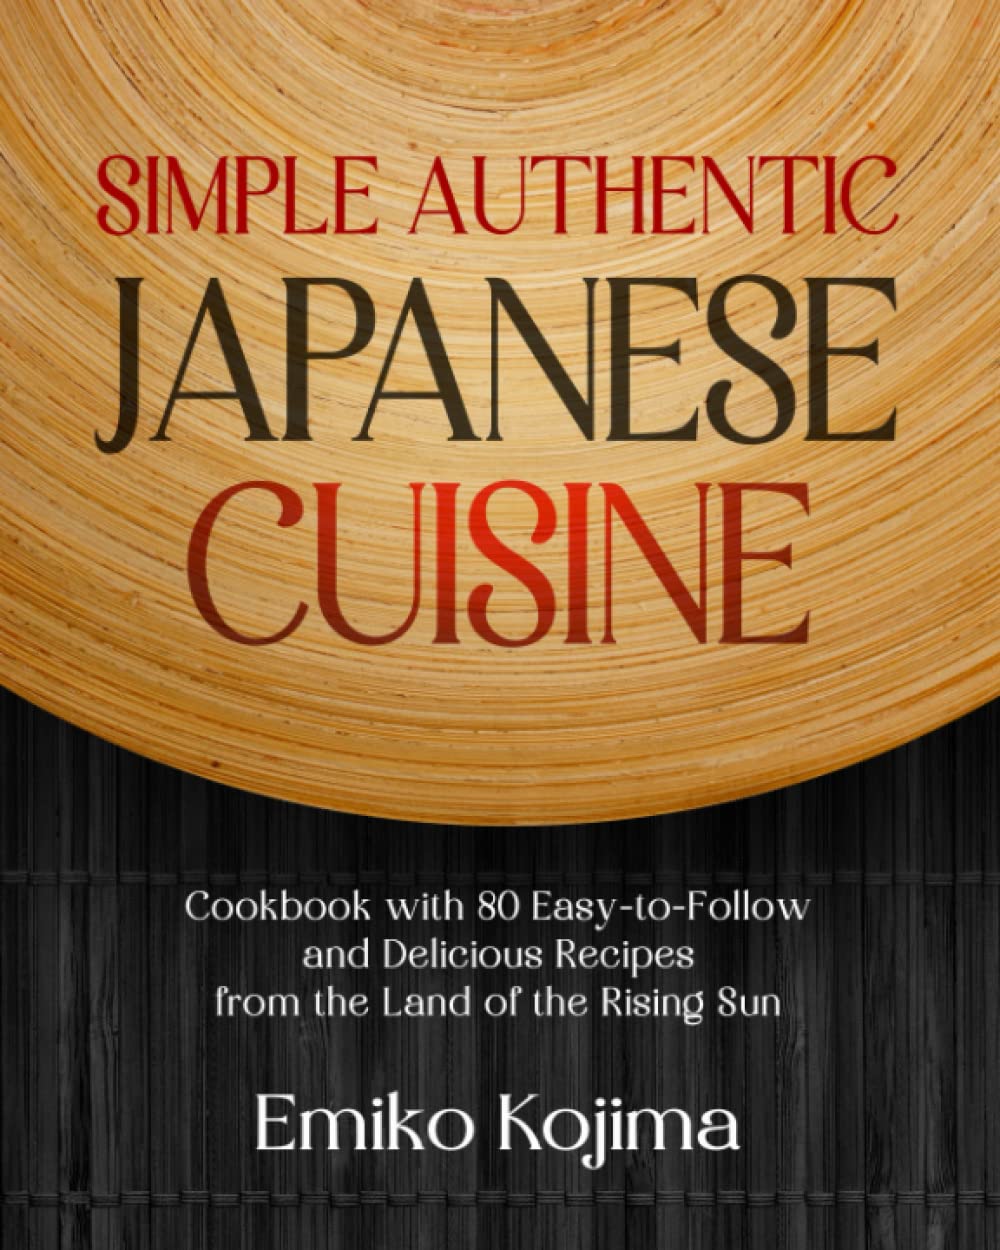 Simple Authentic Japanese Cuisine: Cookbook with 80 Easy-to-Follow and Delicious Recipes from the Land of the Rising Sun